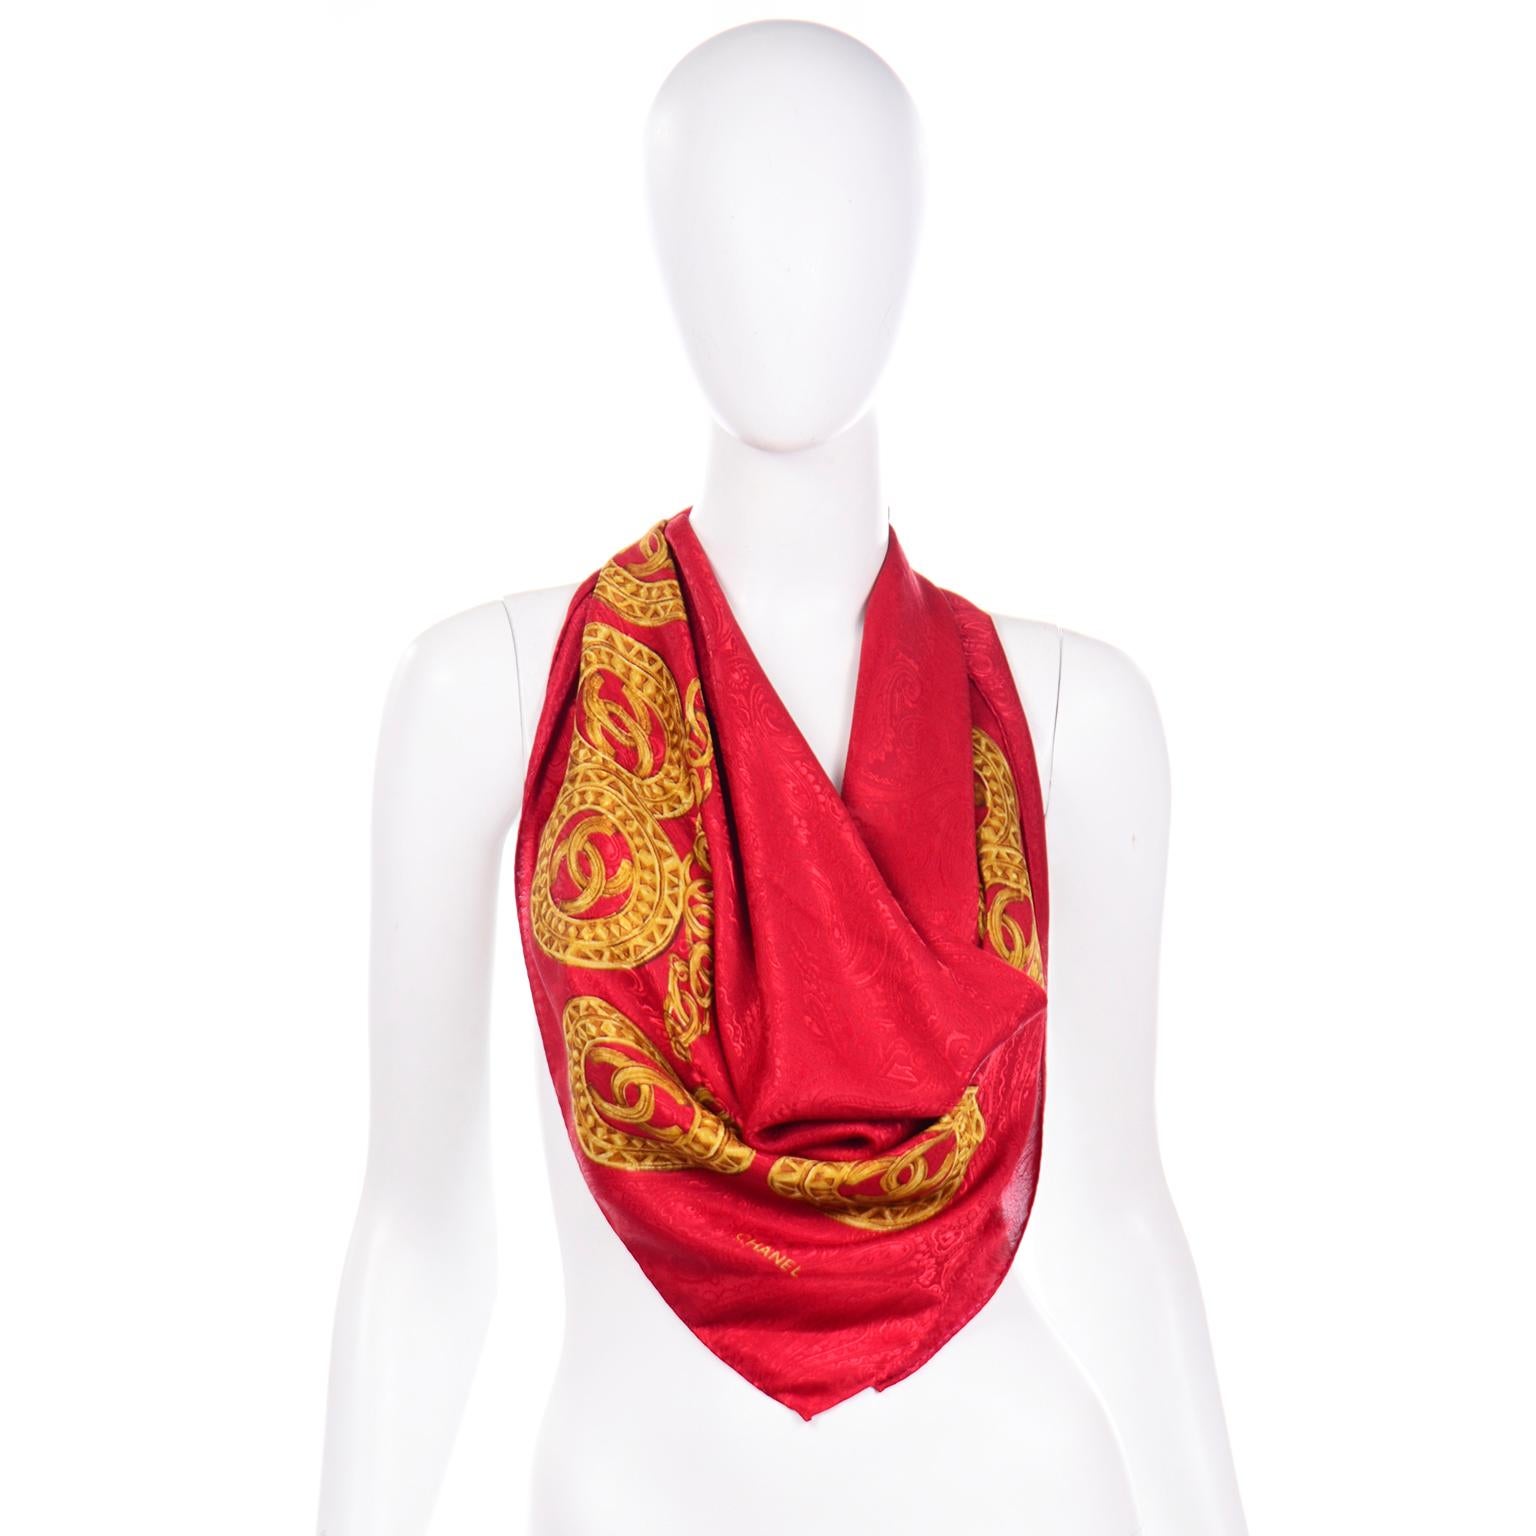 This is an iconic vintage Chanel scarf in a red jacquard silk with gold CC monogram medallions on a gold link chain.  This beautiful hand rolled silk scarf is marked Chanel in the corner and measures 34 inches by 34 inches. This scarf came from an